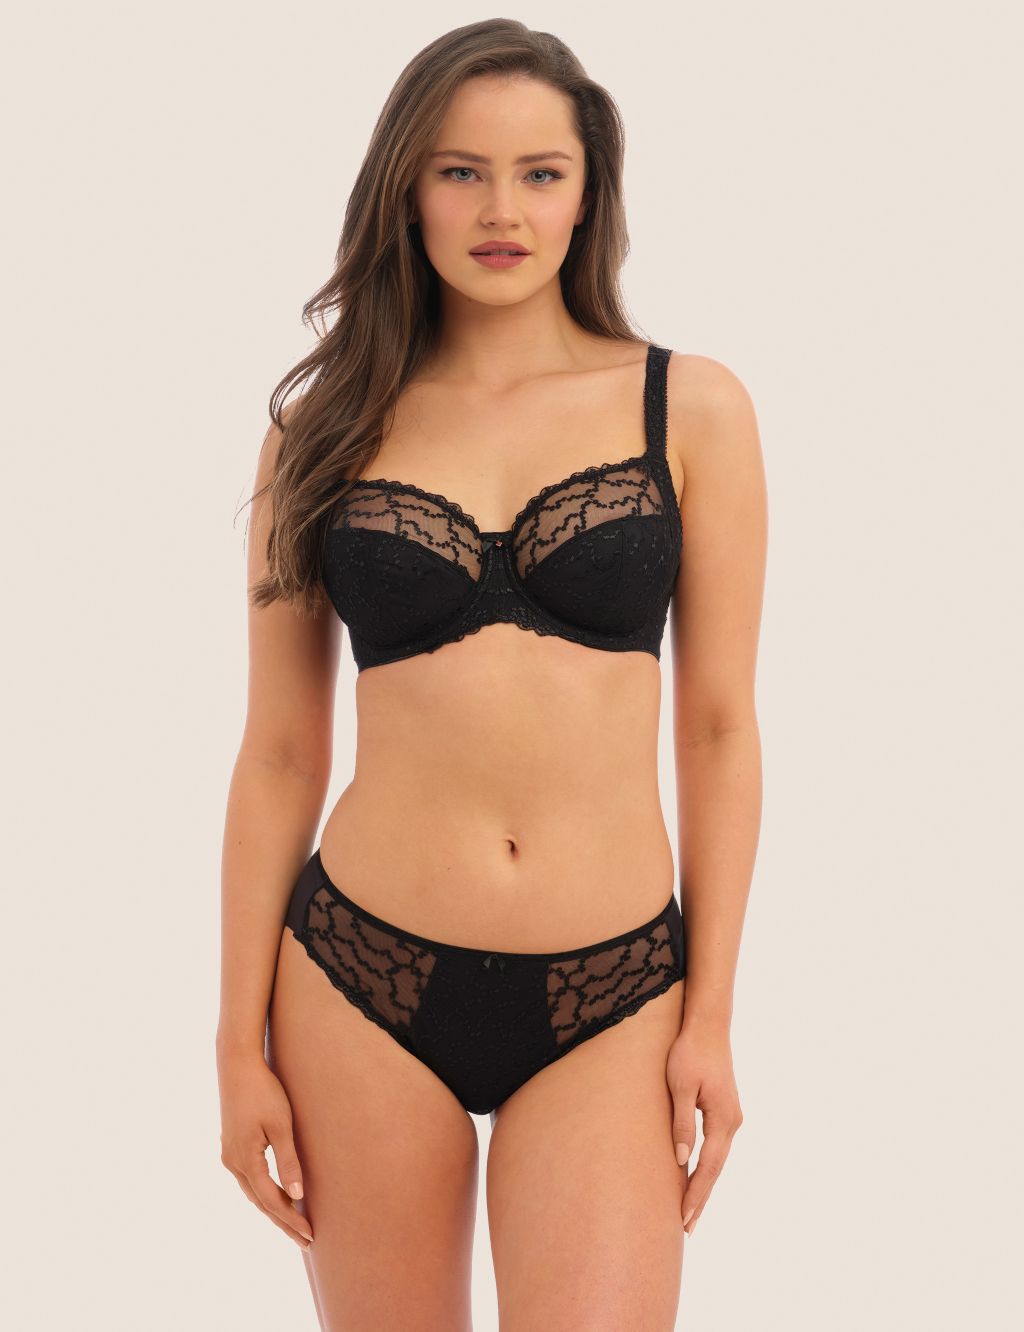 Ana Wired Side Support Bra D-J image 5